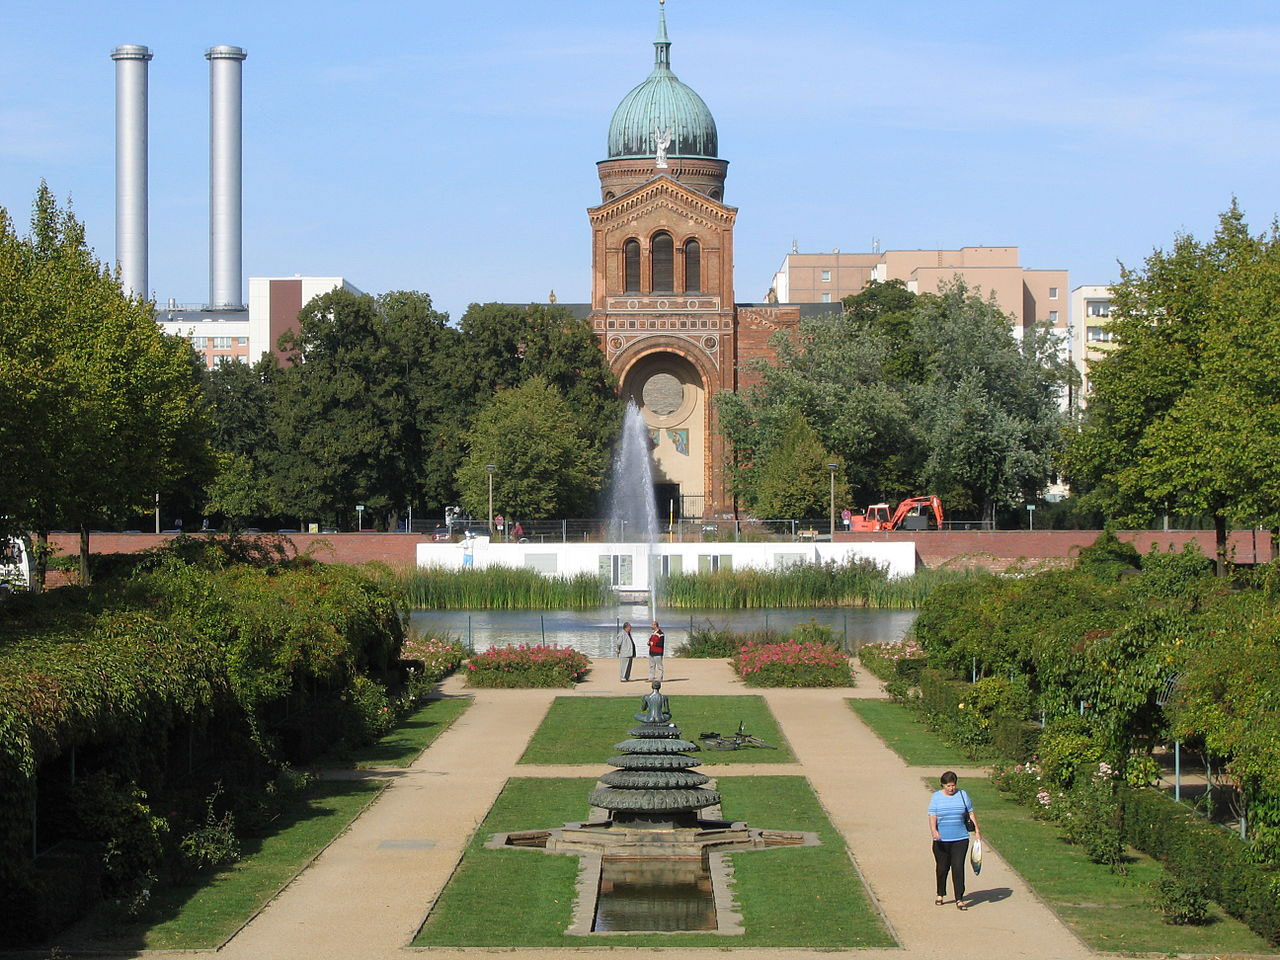 A large domed church visible beyond a garden and a canal.